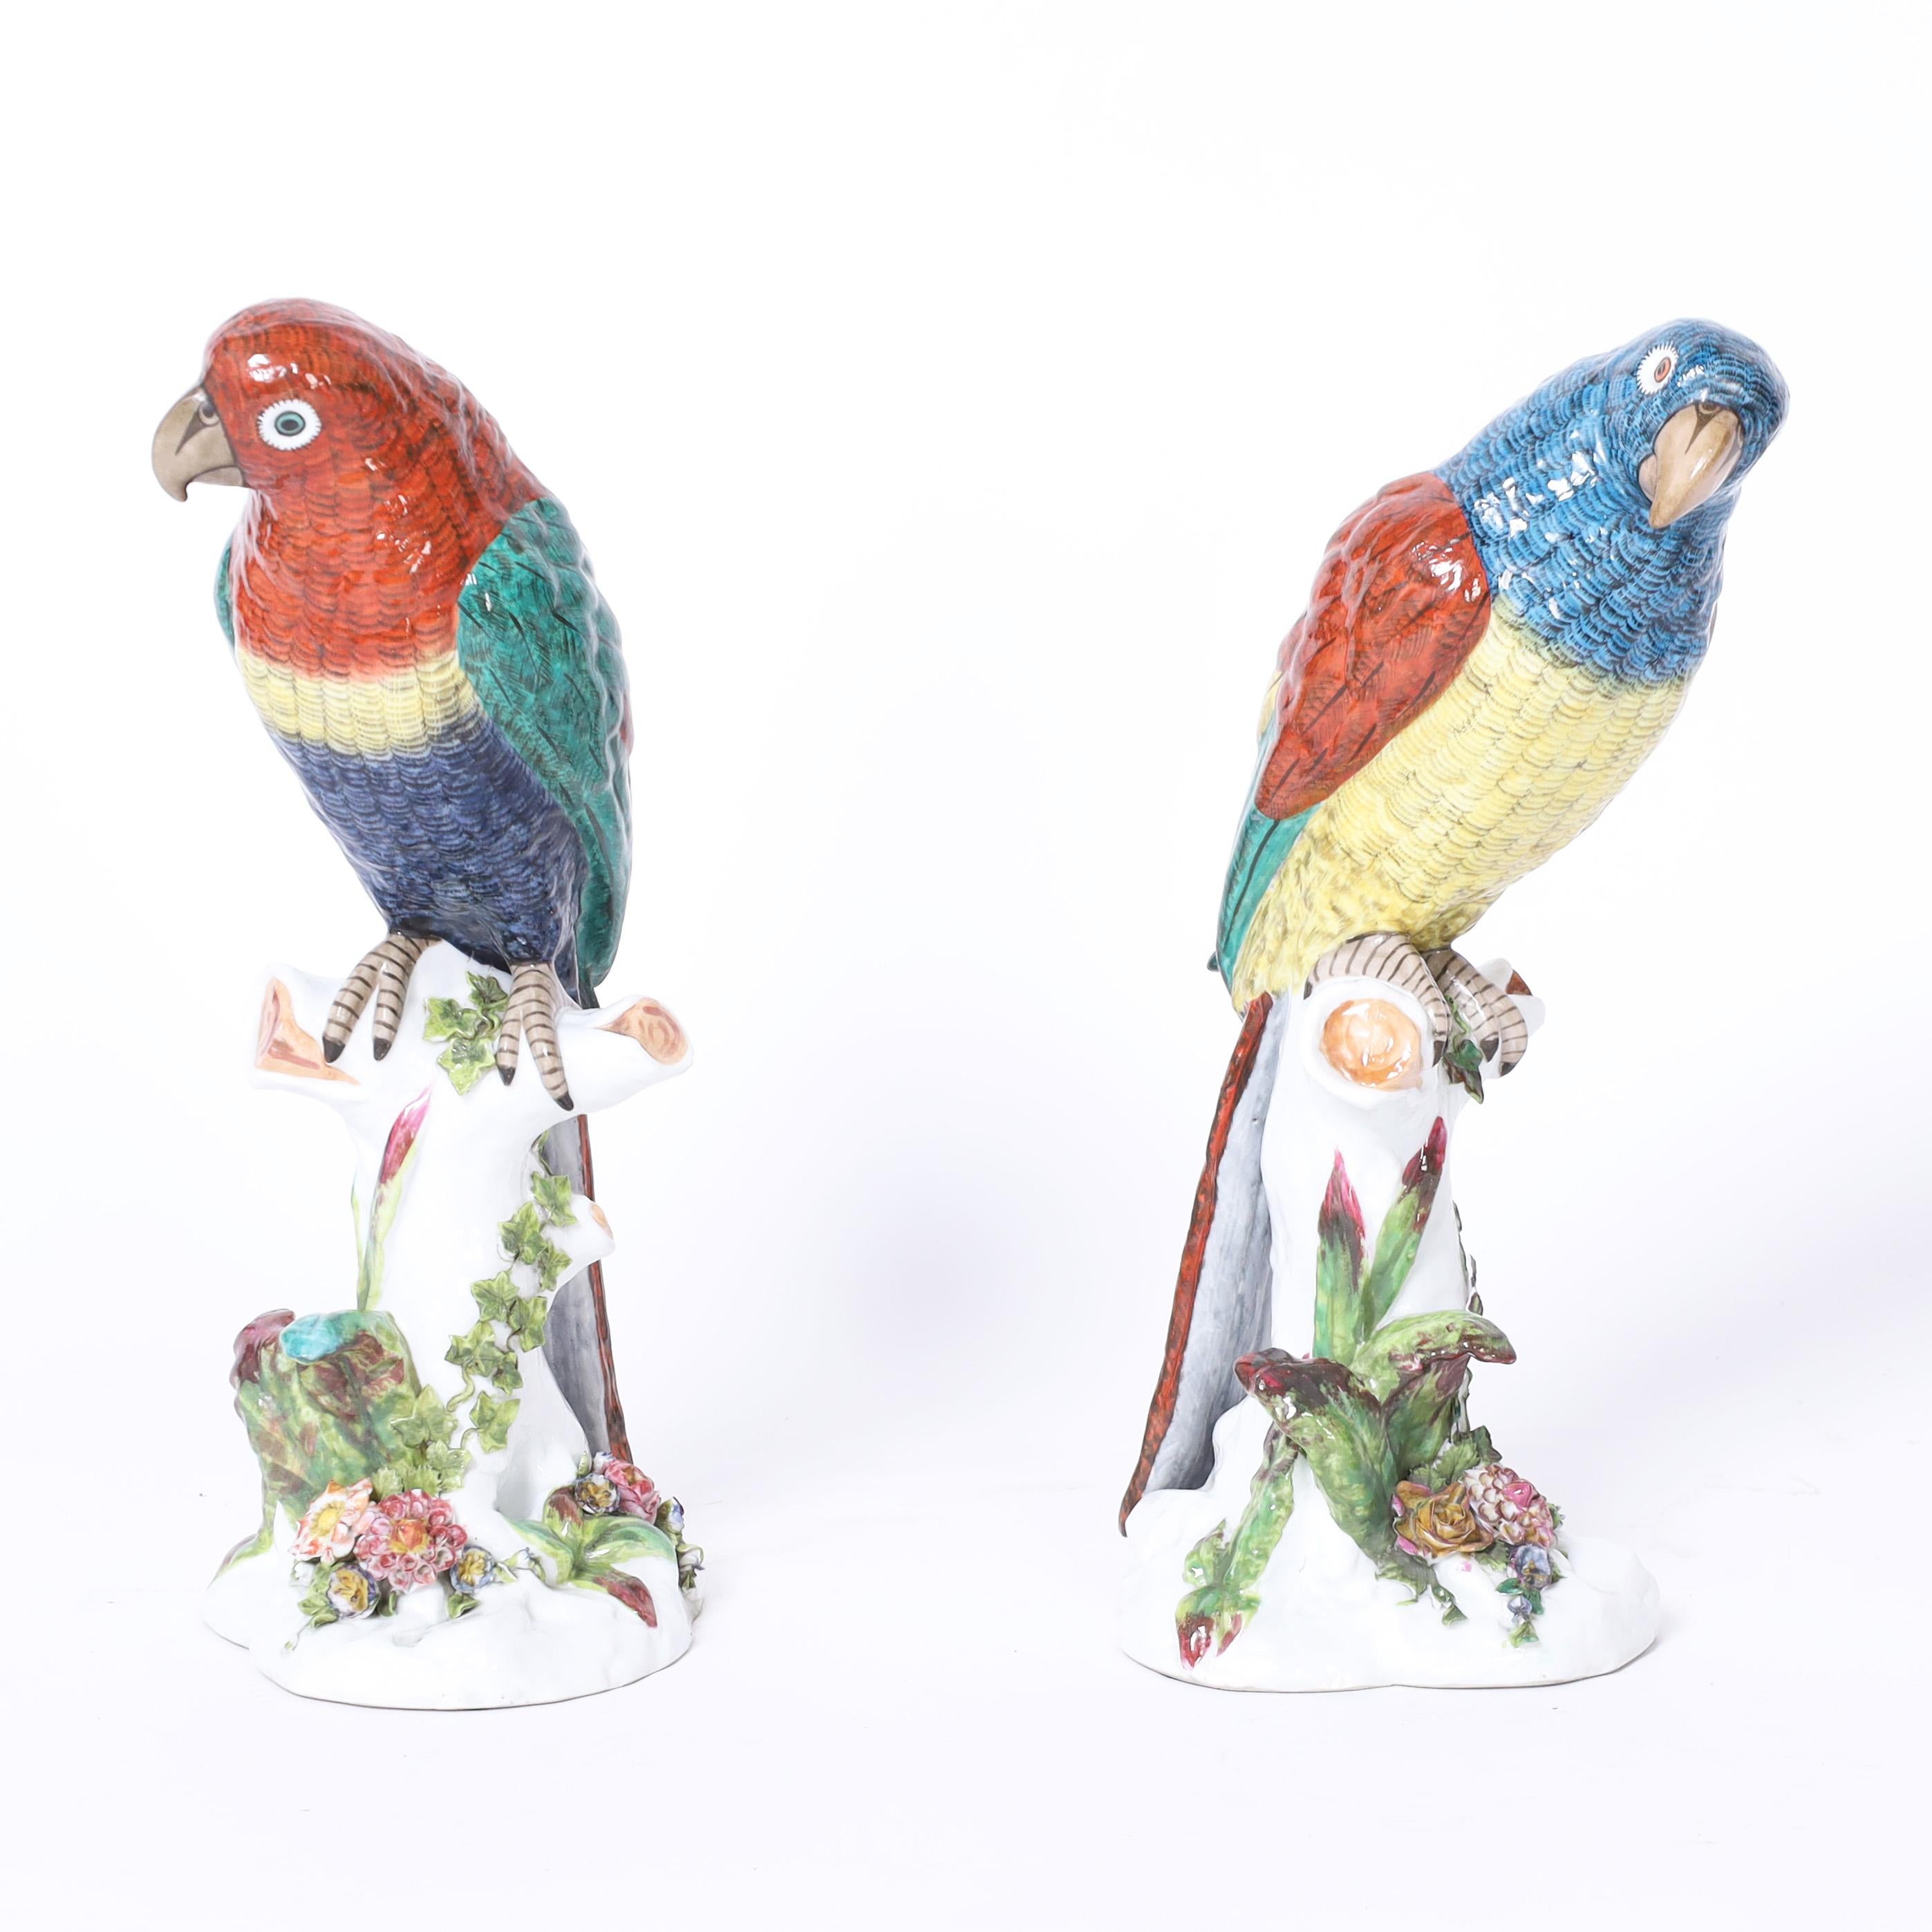 Standout pair of life size French porcelain parrots perched on tree trunks, hand decorated in striking tropical colors. Signed by the maker on the bottoms.